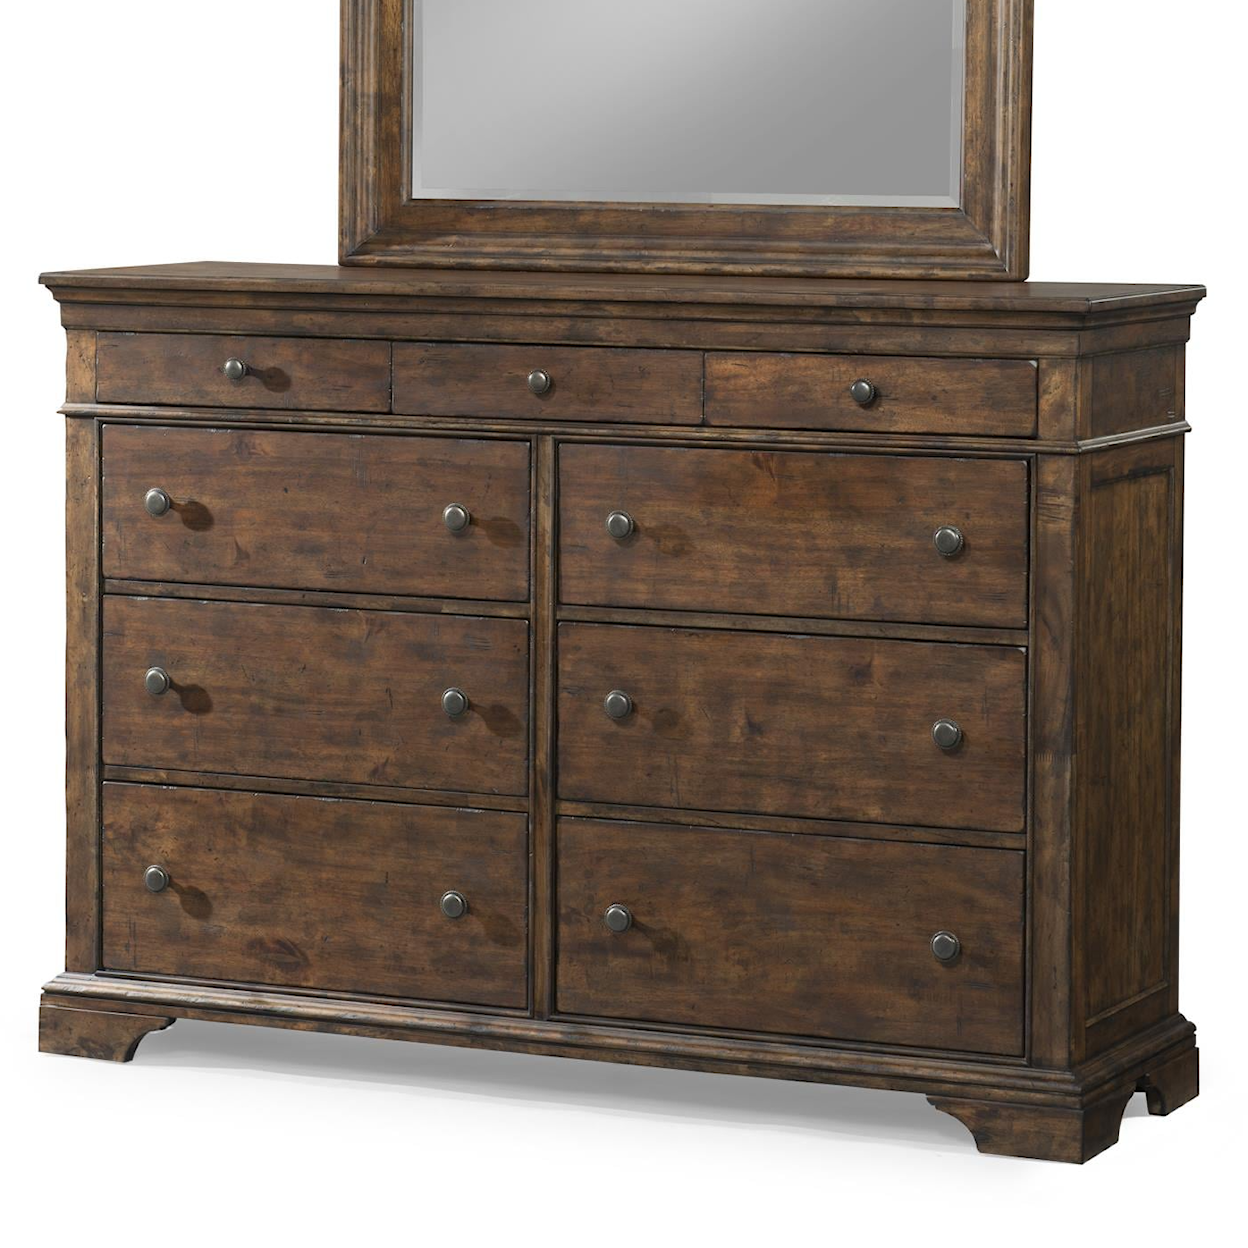 Trisha Yearwood Home Collection by Legacy Classic Trisha Yearwood Home Dresser